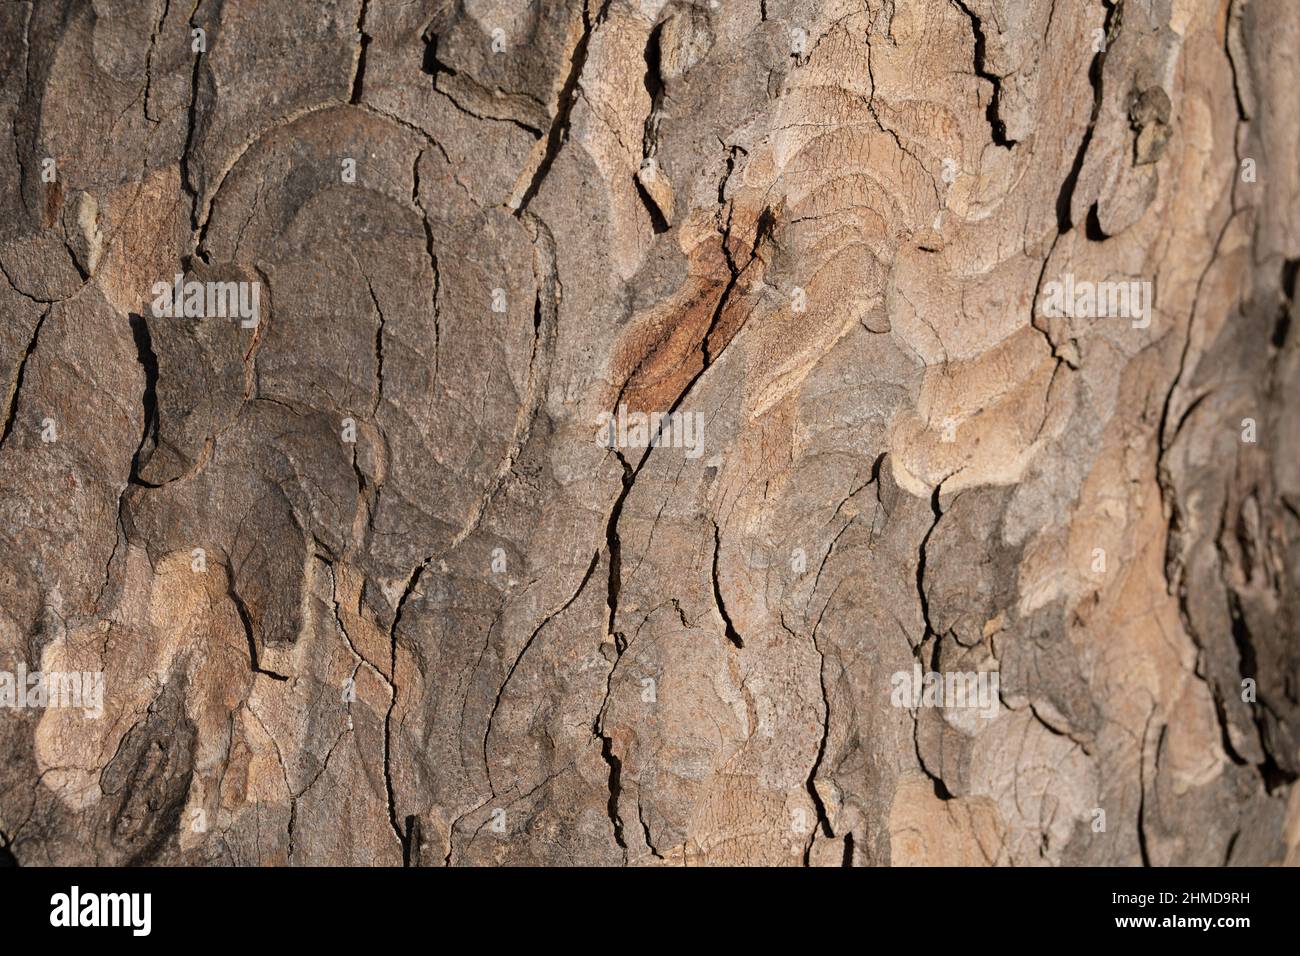 A sturdy tree has textured and patterned bark. Stock Photo